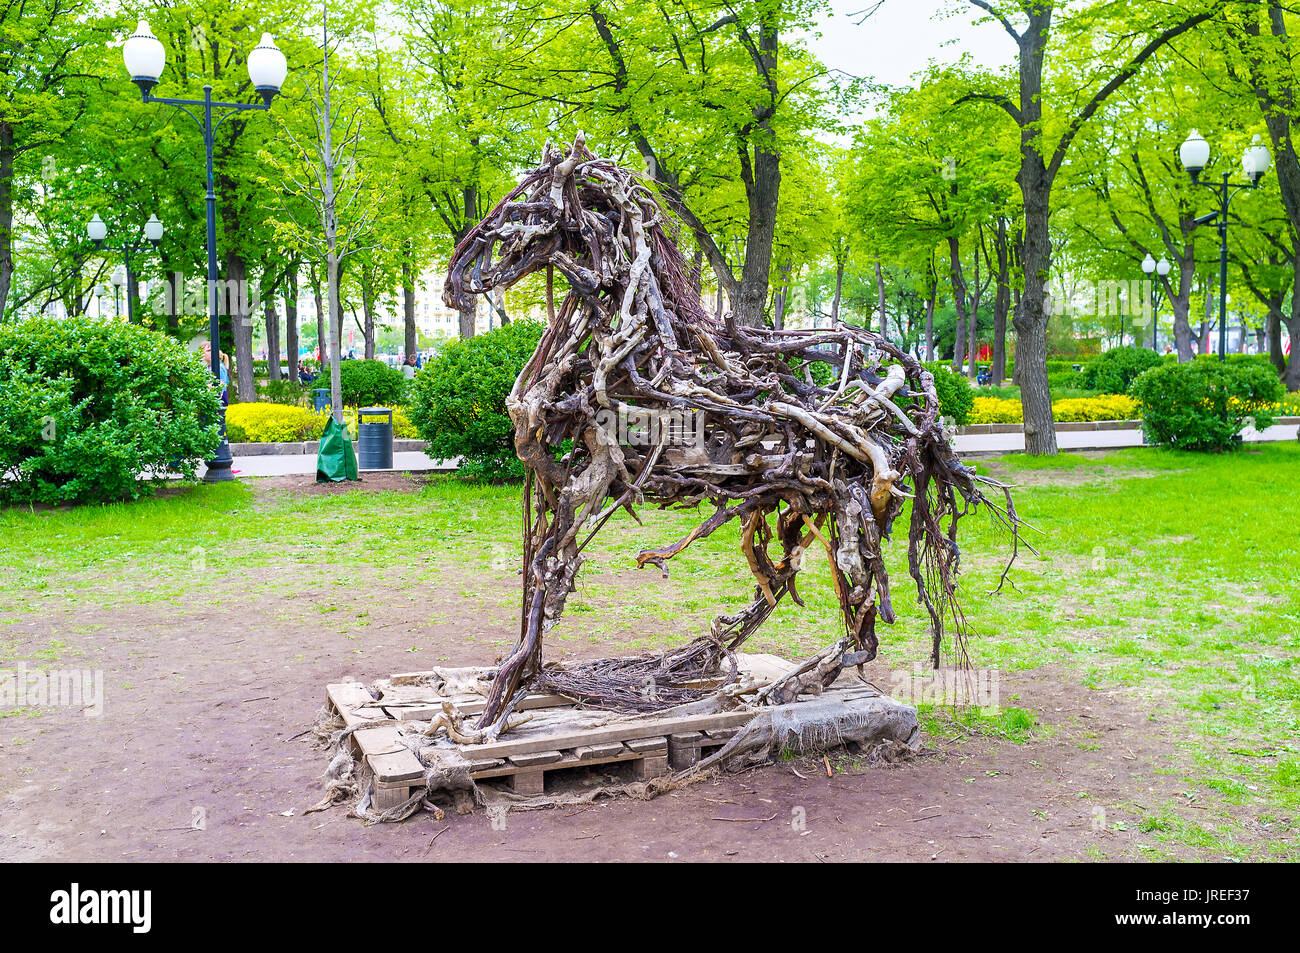 MOSCOW, RUSSIA - MAY 11, 2015: The sculpture of wooden horse located in Gorky Park, on May 11 in Moscow, Russia Stock Photo